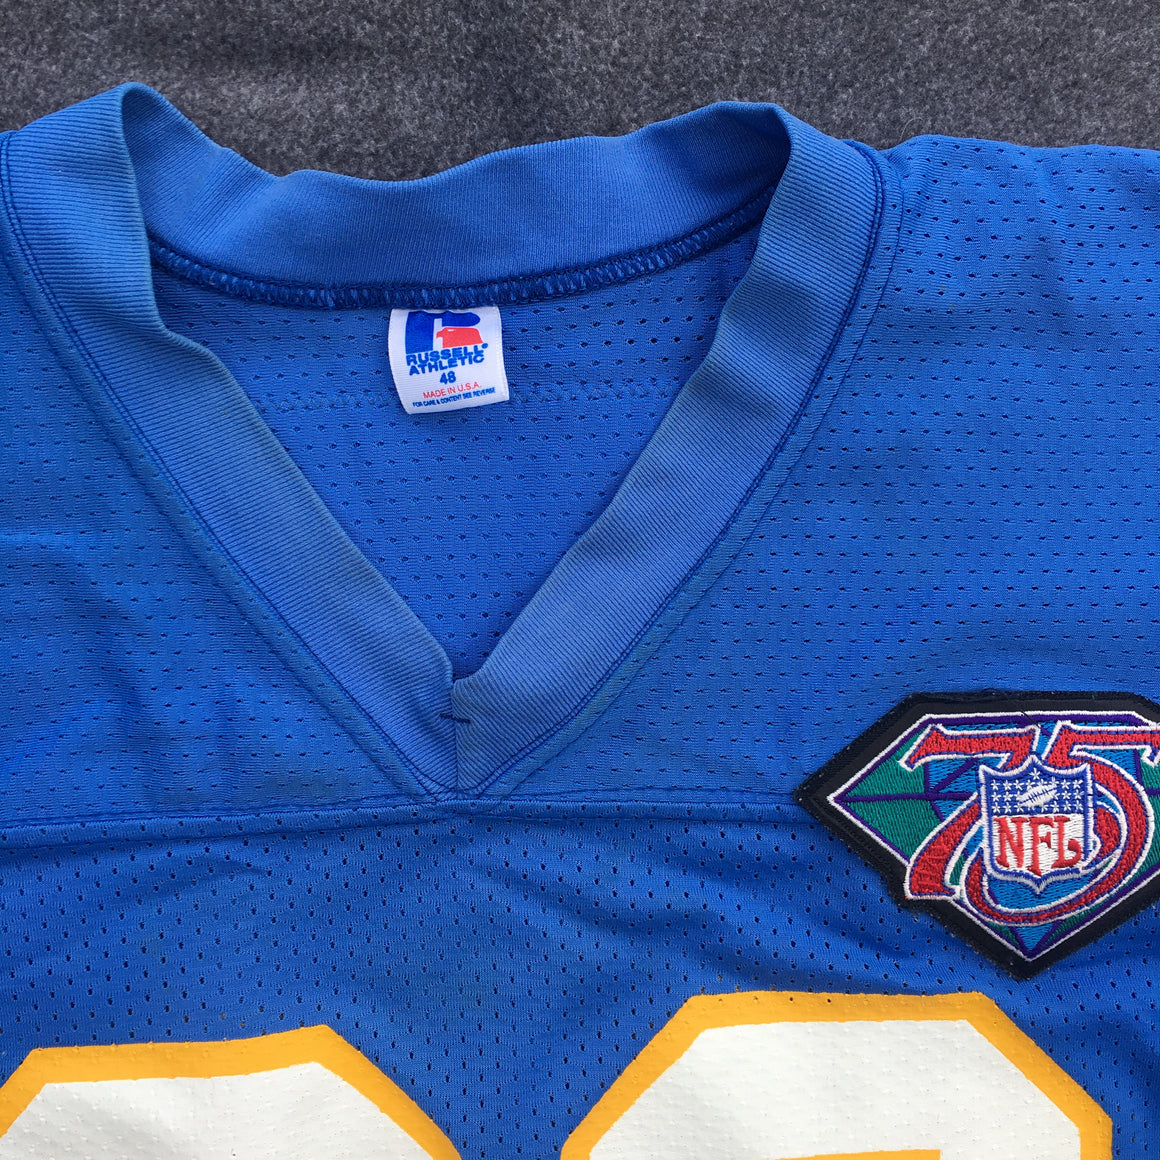 San Diego Chargers Natrone Means jersey - 48 / XL